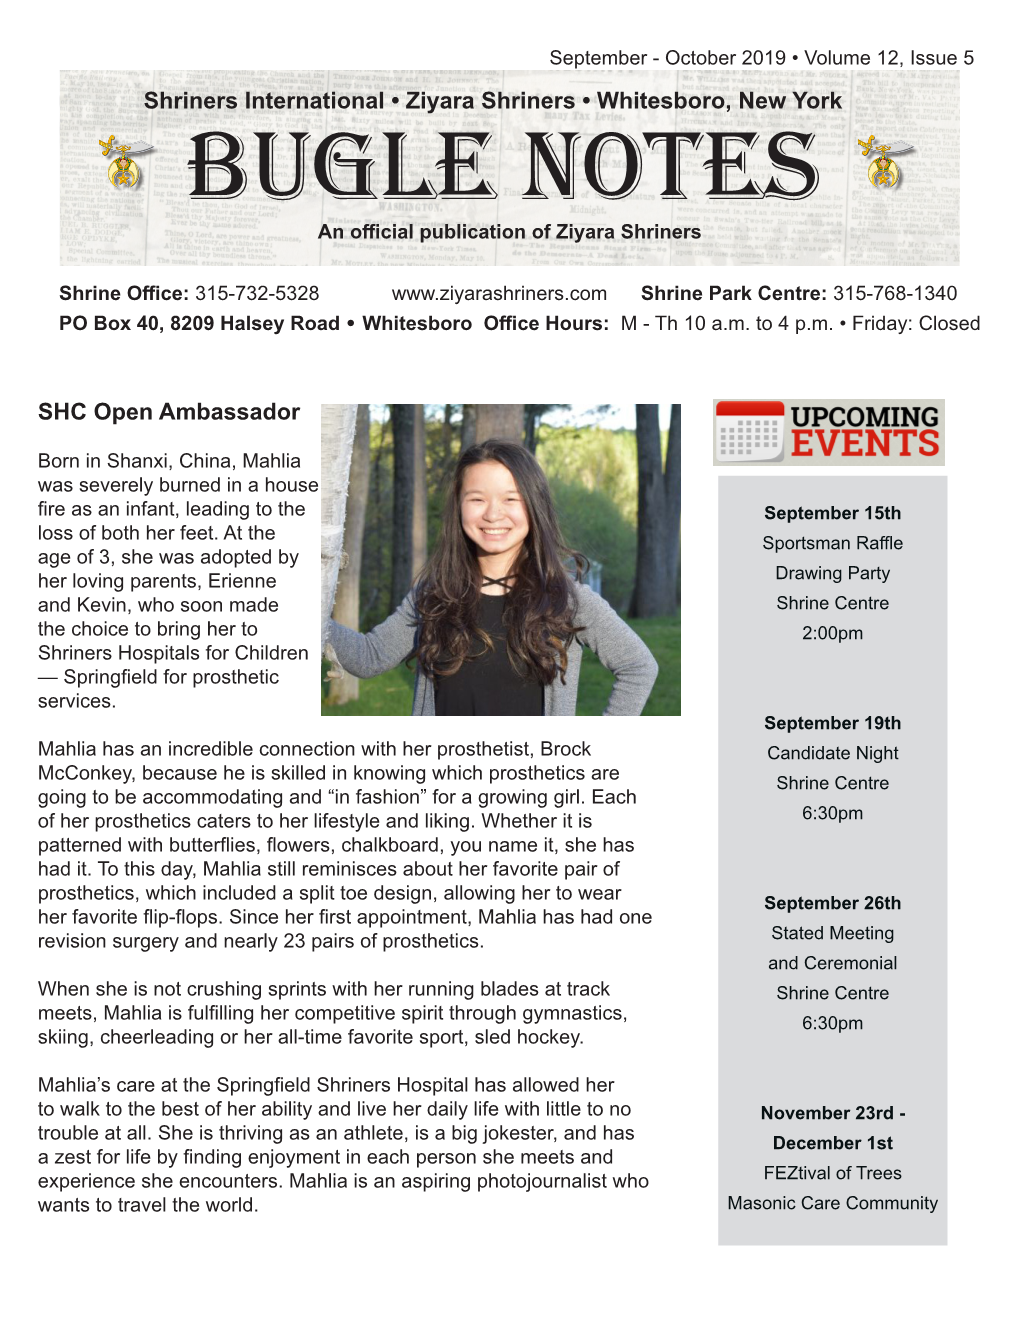 BUGLE NOTES an Official Publication of Ziyara Shriners